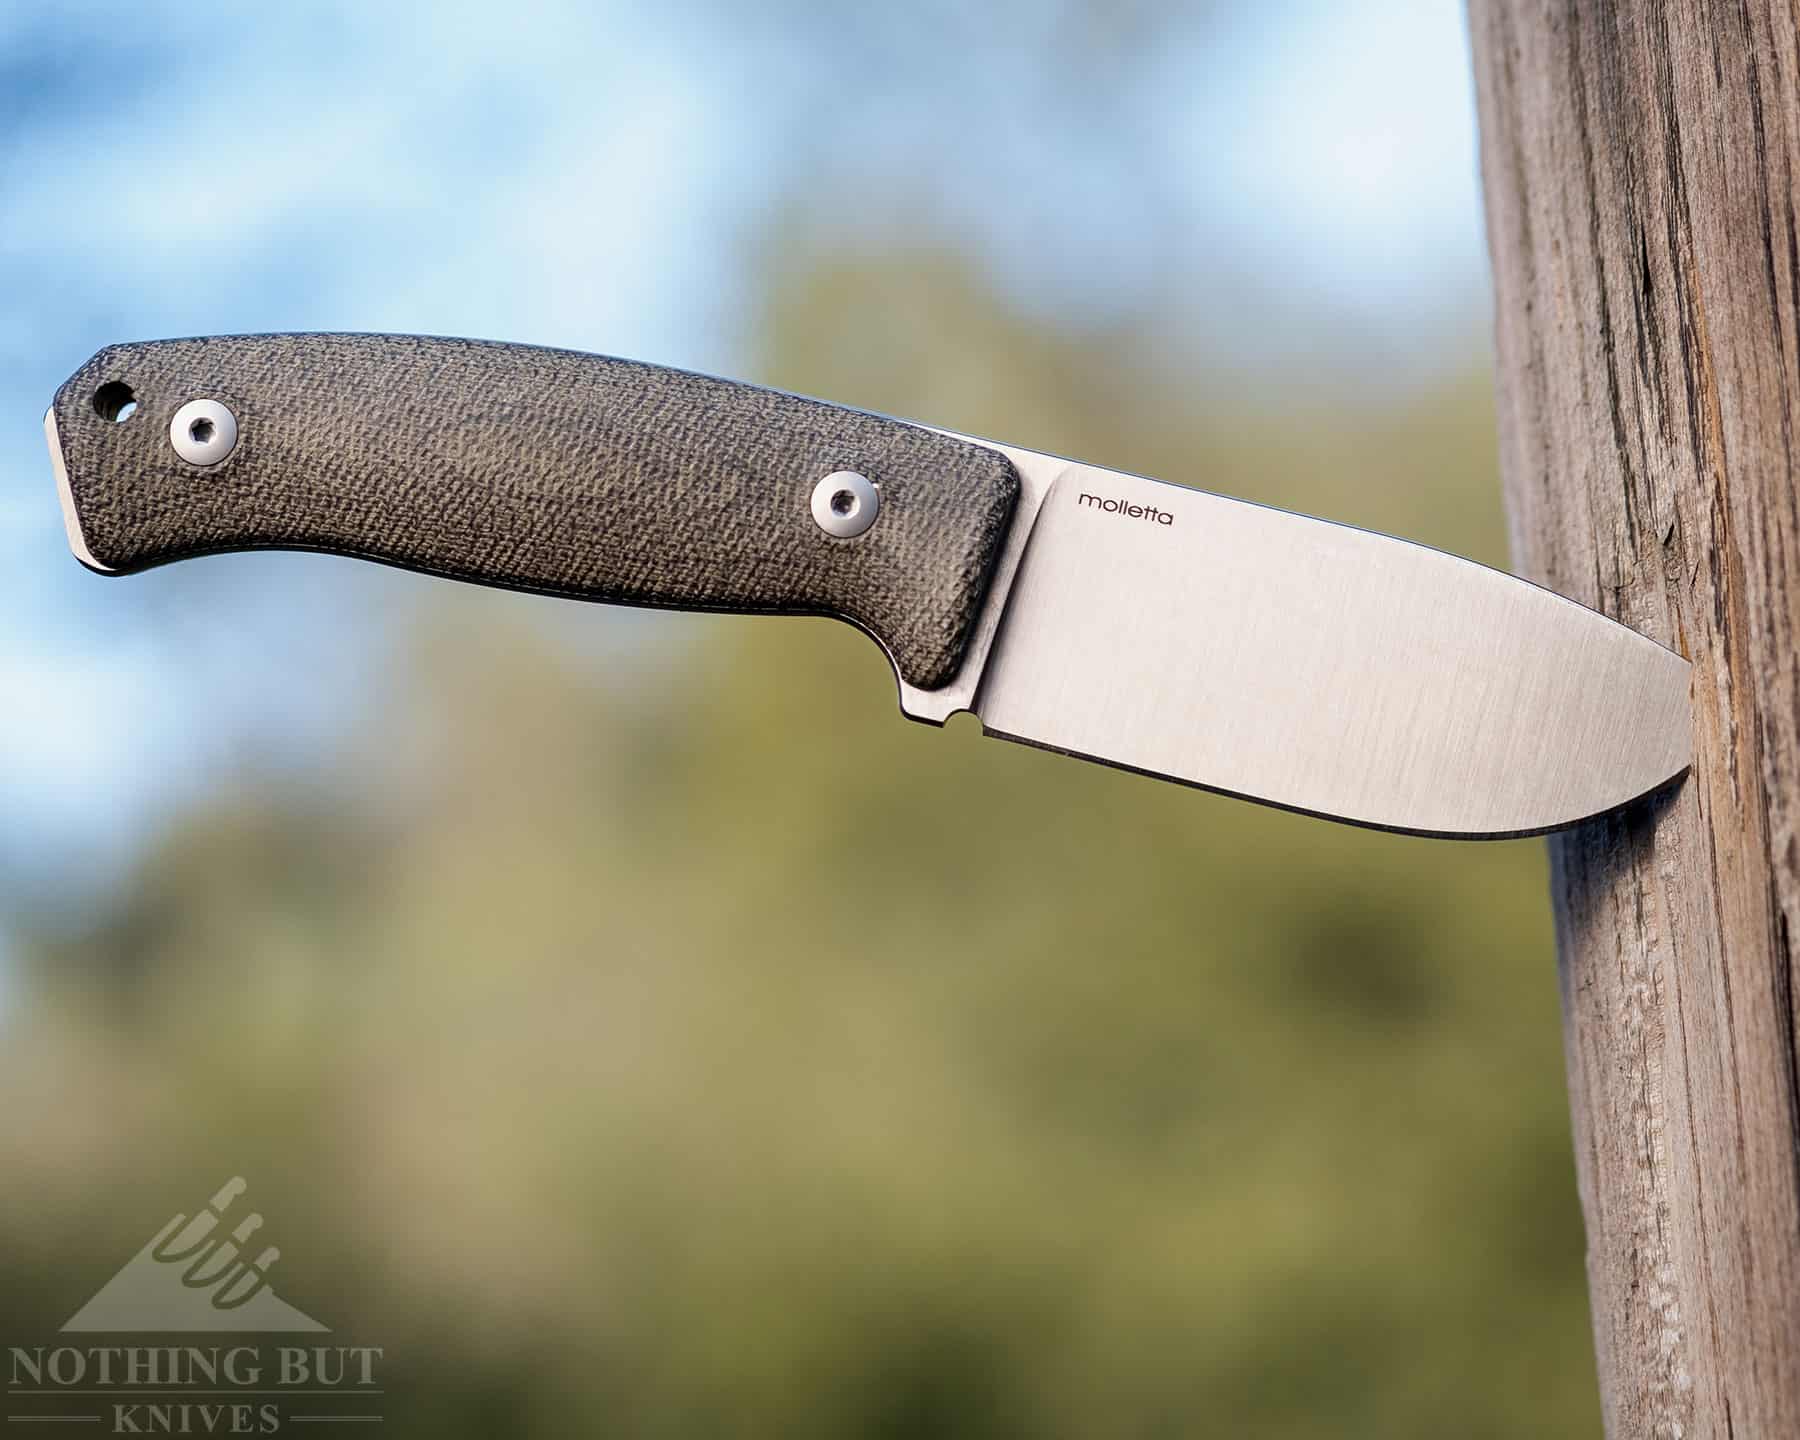 The Lionsteel M2M designer obviously put a lot of thought into every aspect of this impressive mid-size fixed blade.